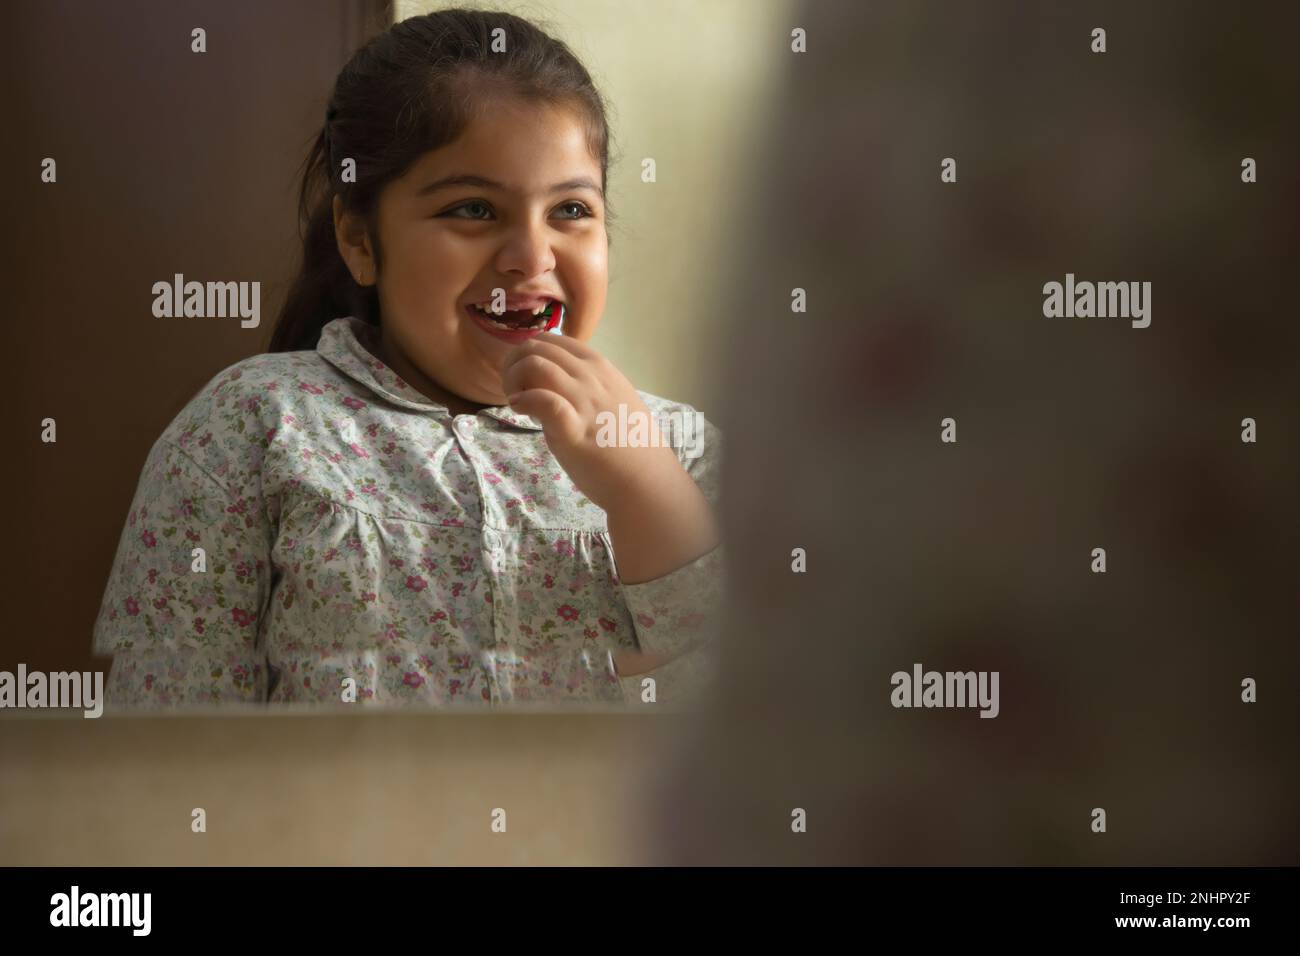 Portrait of little girl brushing teeth in front of mirror Stock Photo